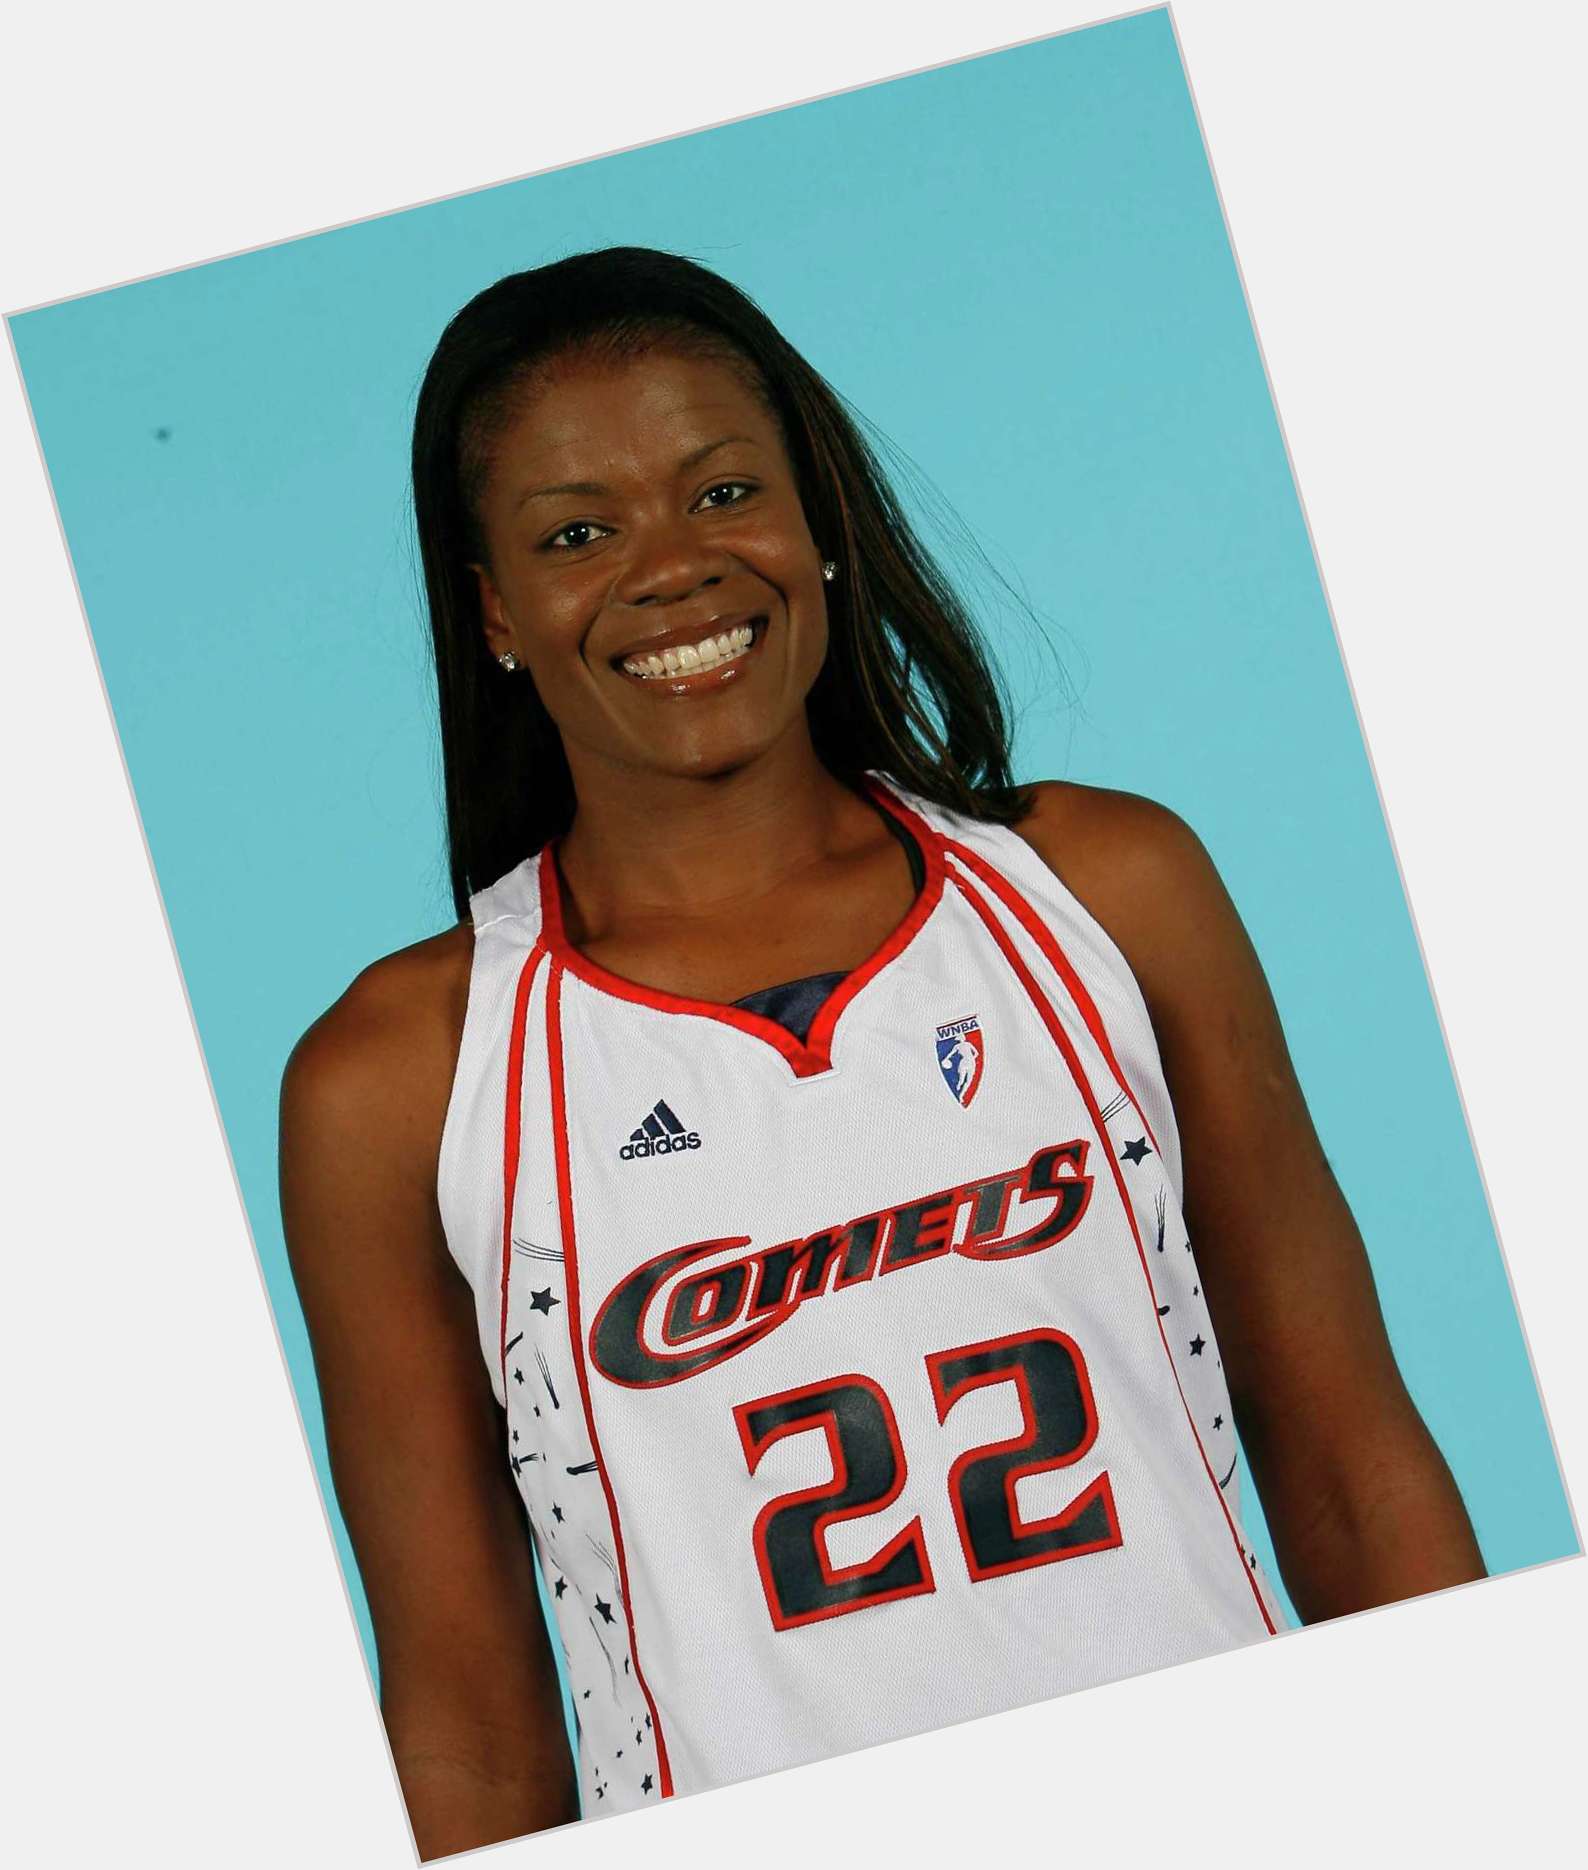 Http://fanpagepress.net/m/S/Sheryl Swoopes Sexy 5